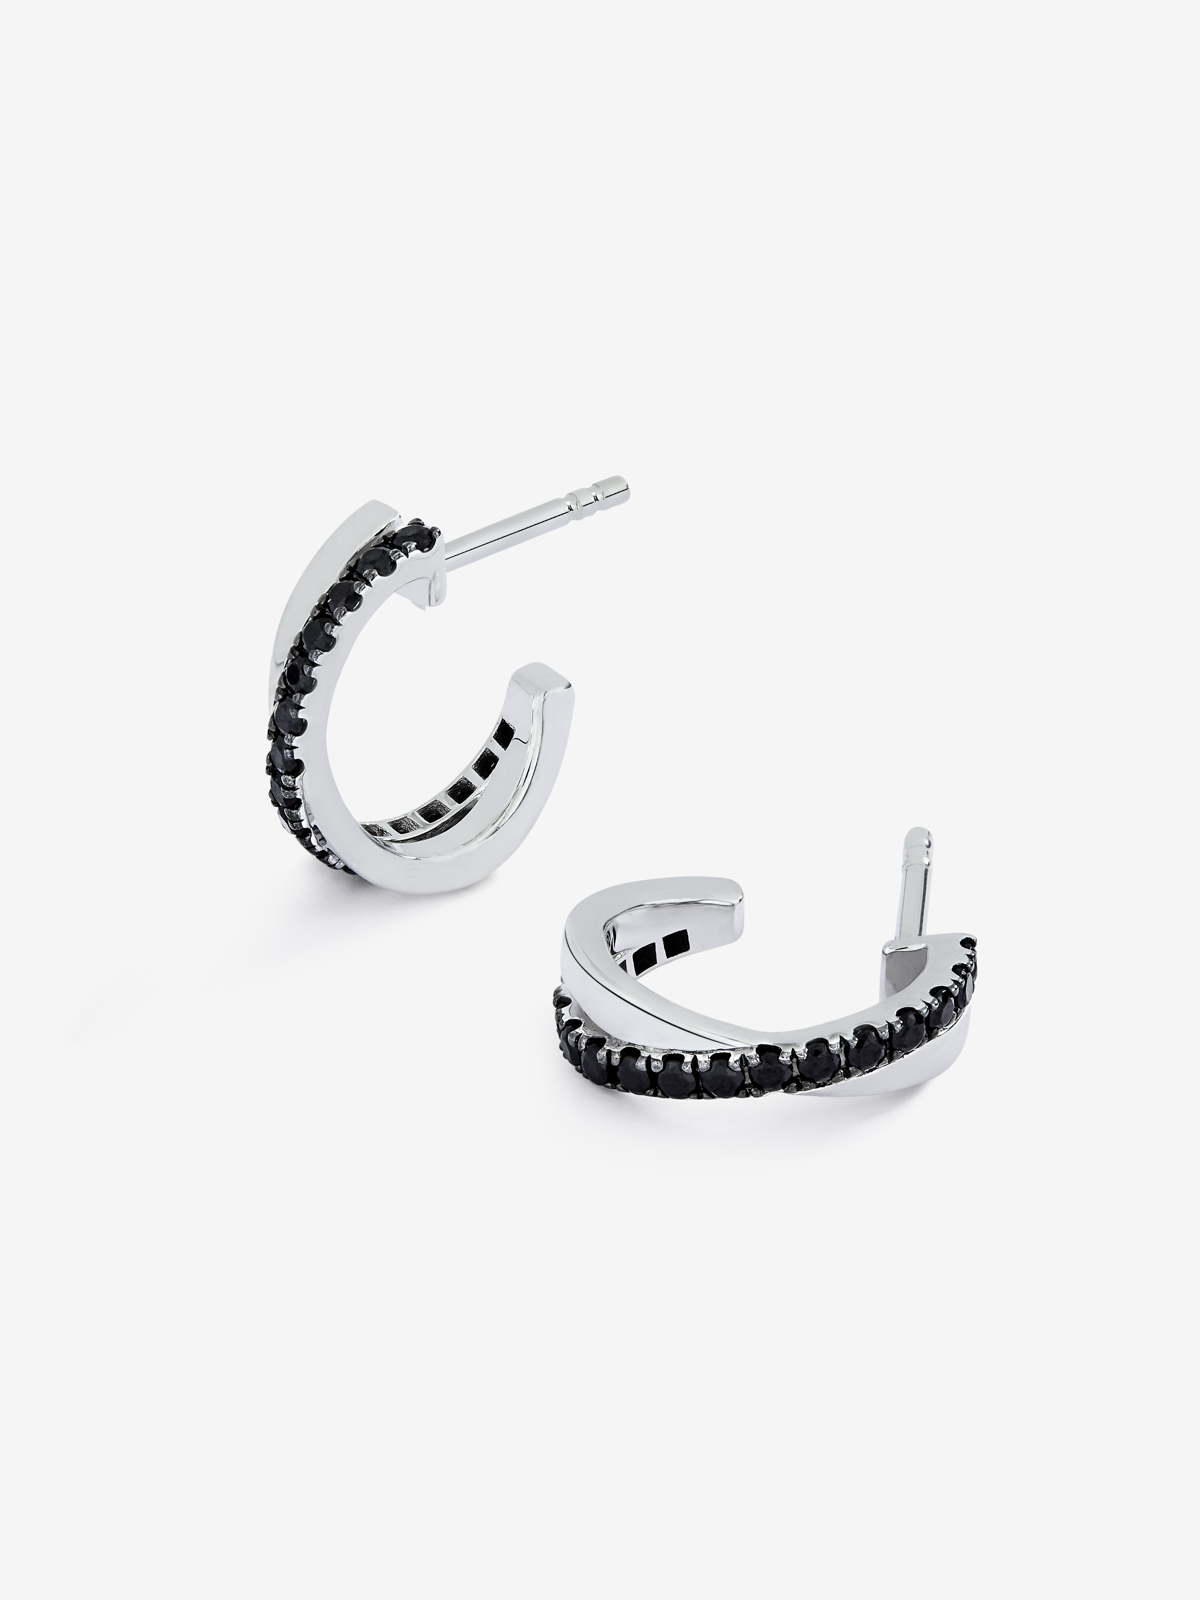 Thin cross hoop earrings made of 925 silver with spinels.